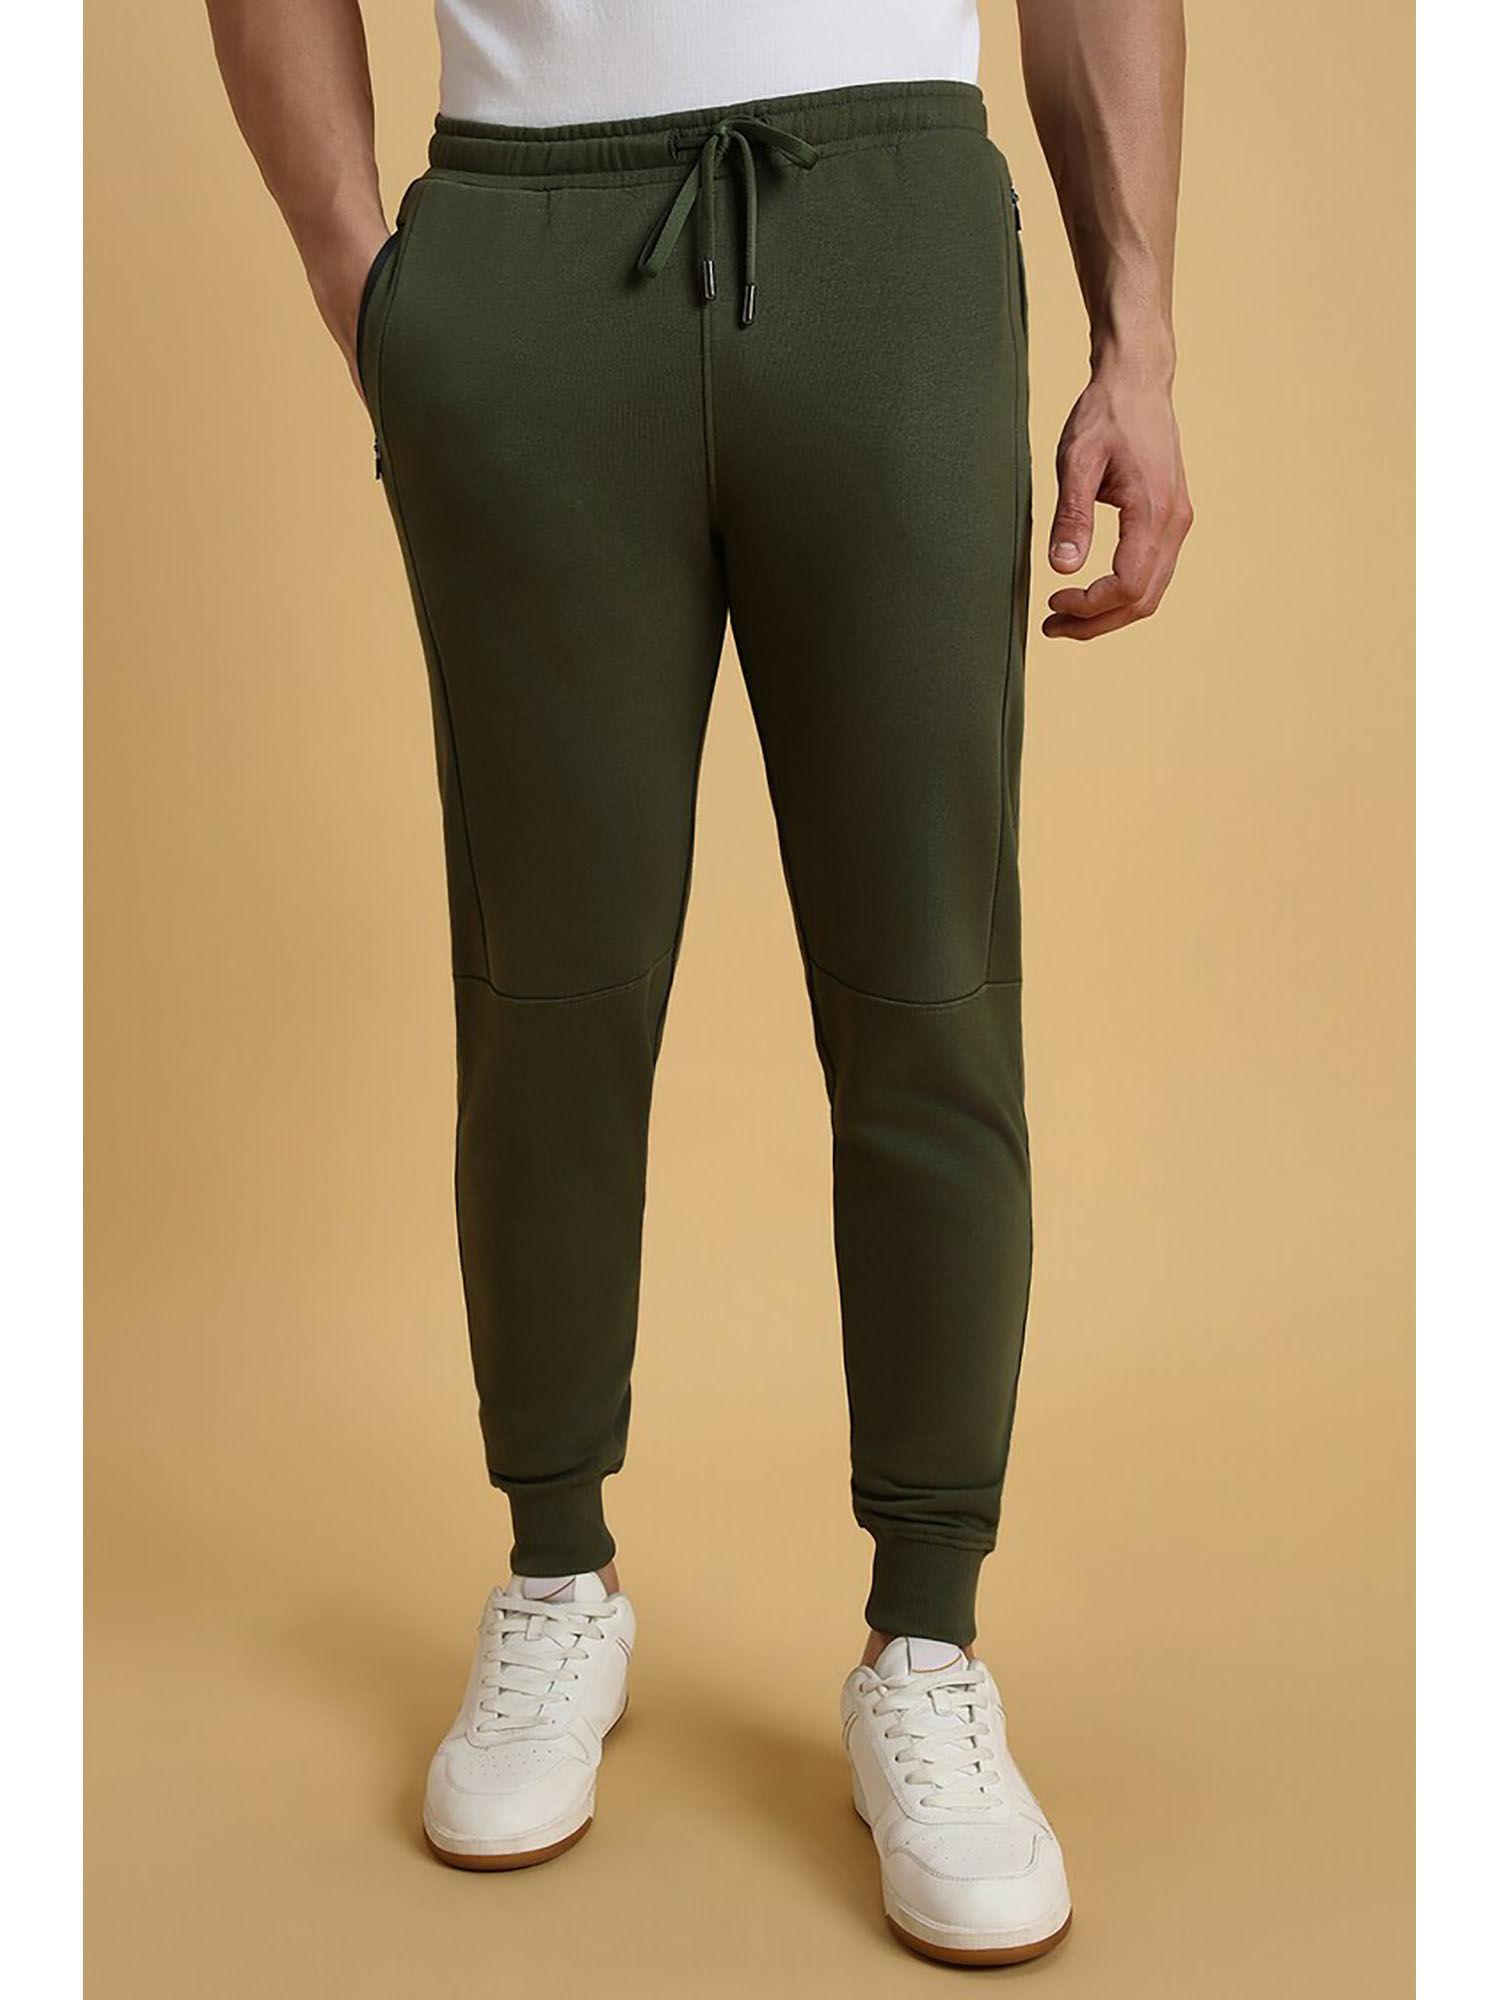 solid green joggers